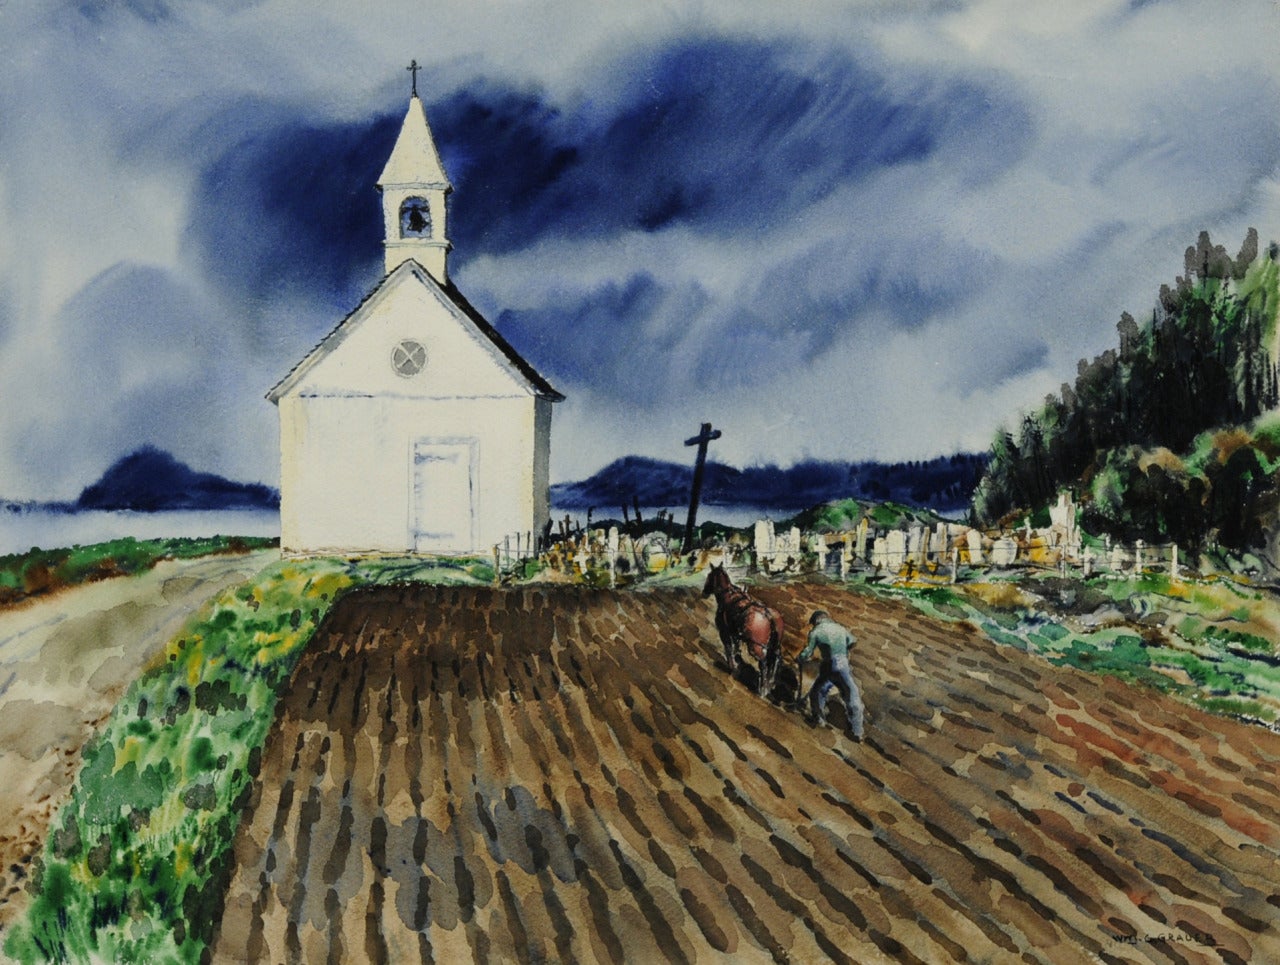 William C. Grauer Landscape Art - Untitled (The Church and the Plow)